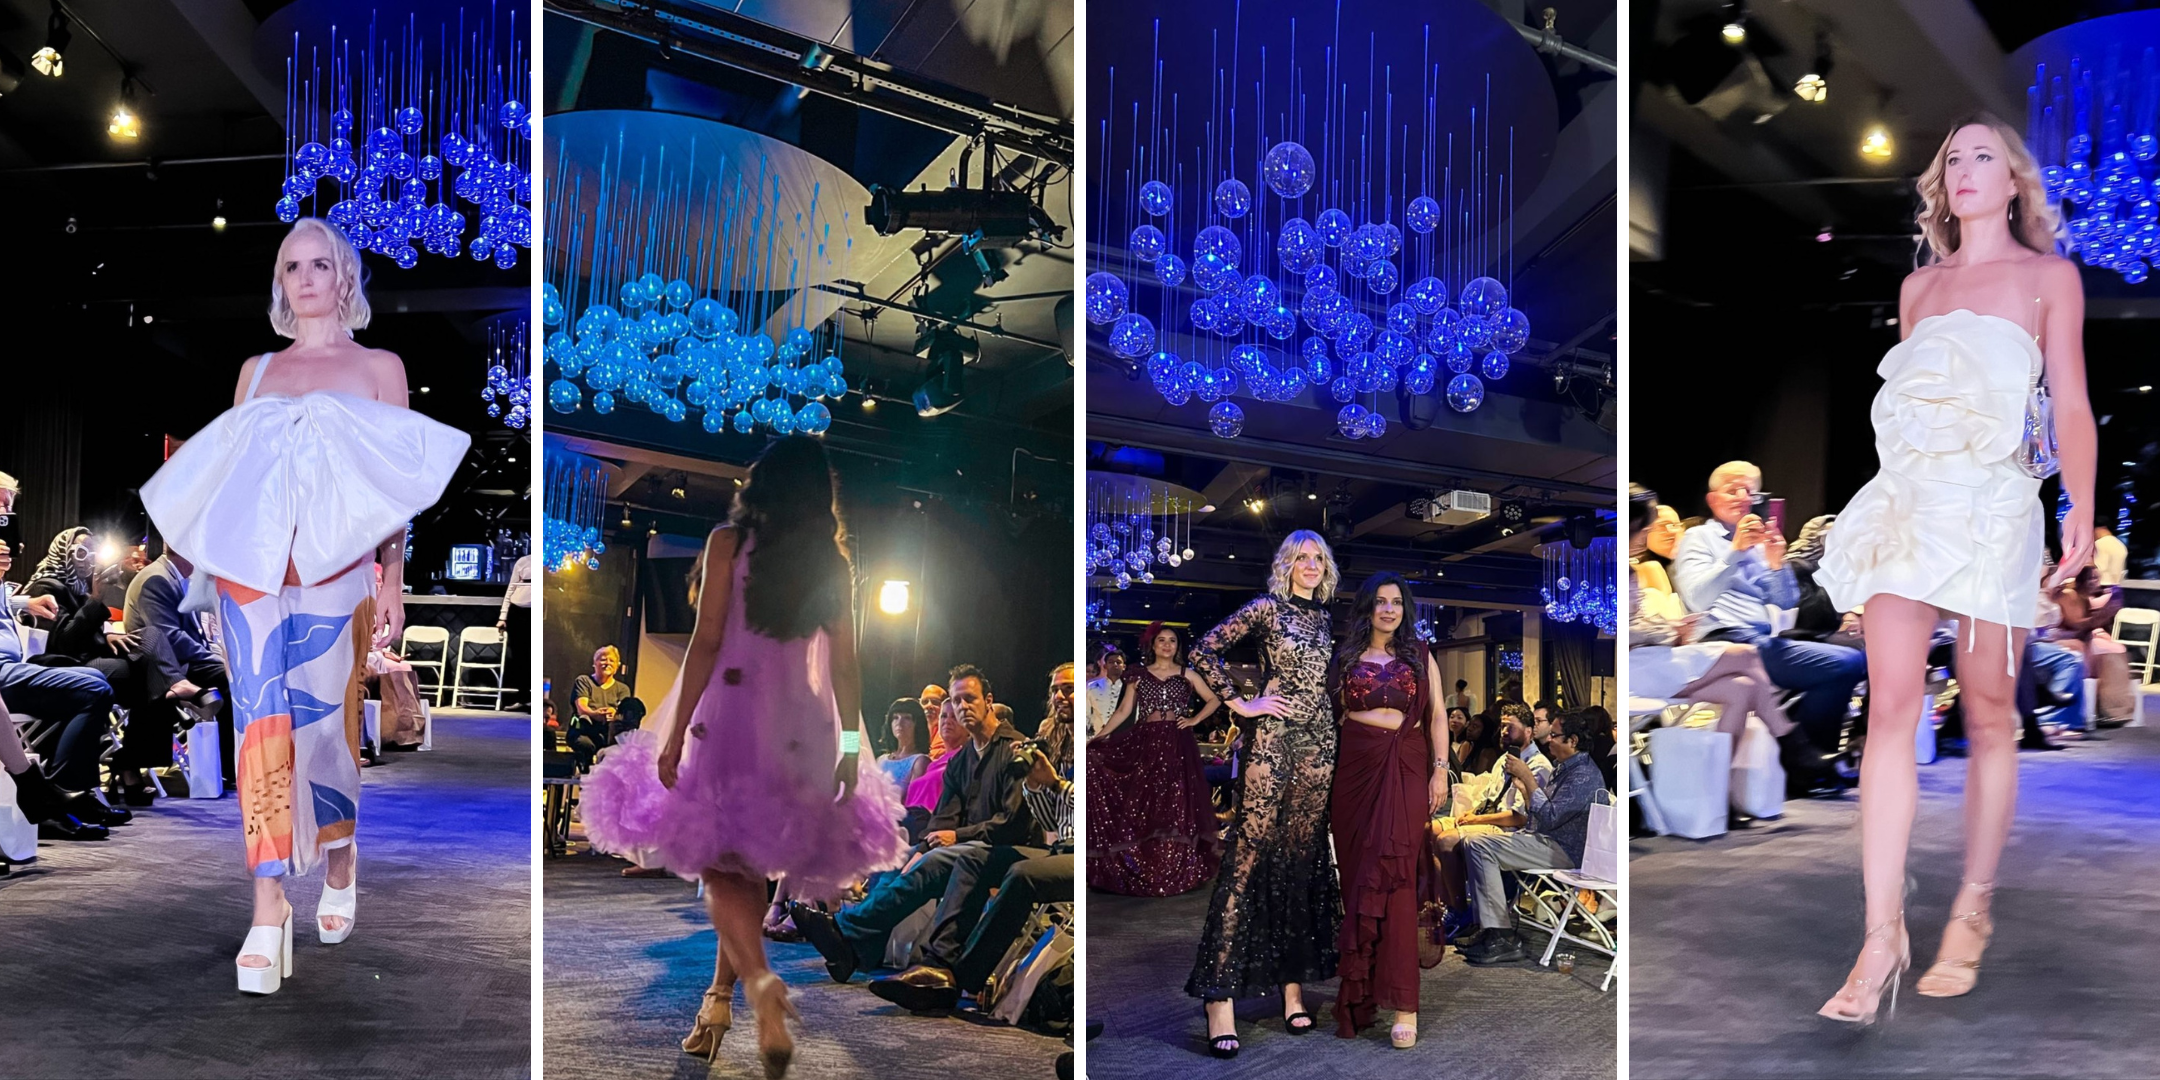 Recovery on the Runway: A NYFW Showcase with Substance